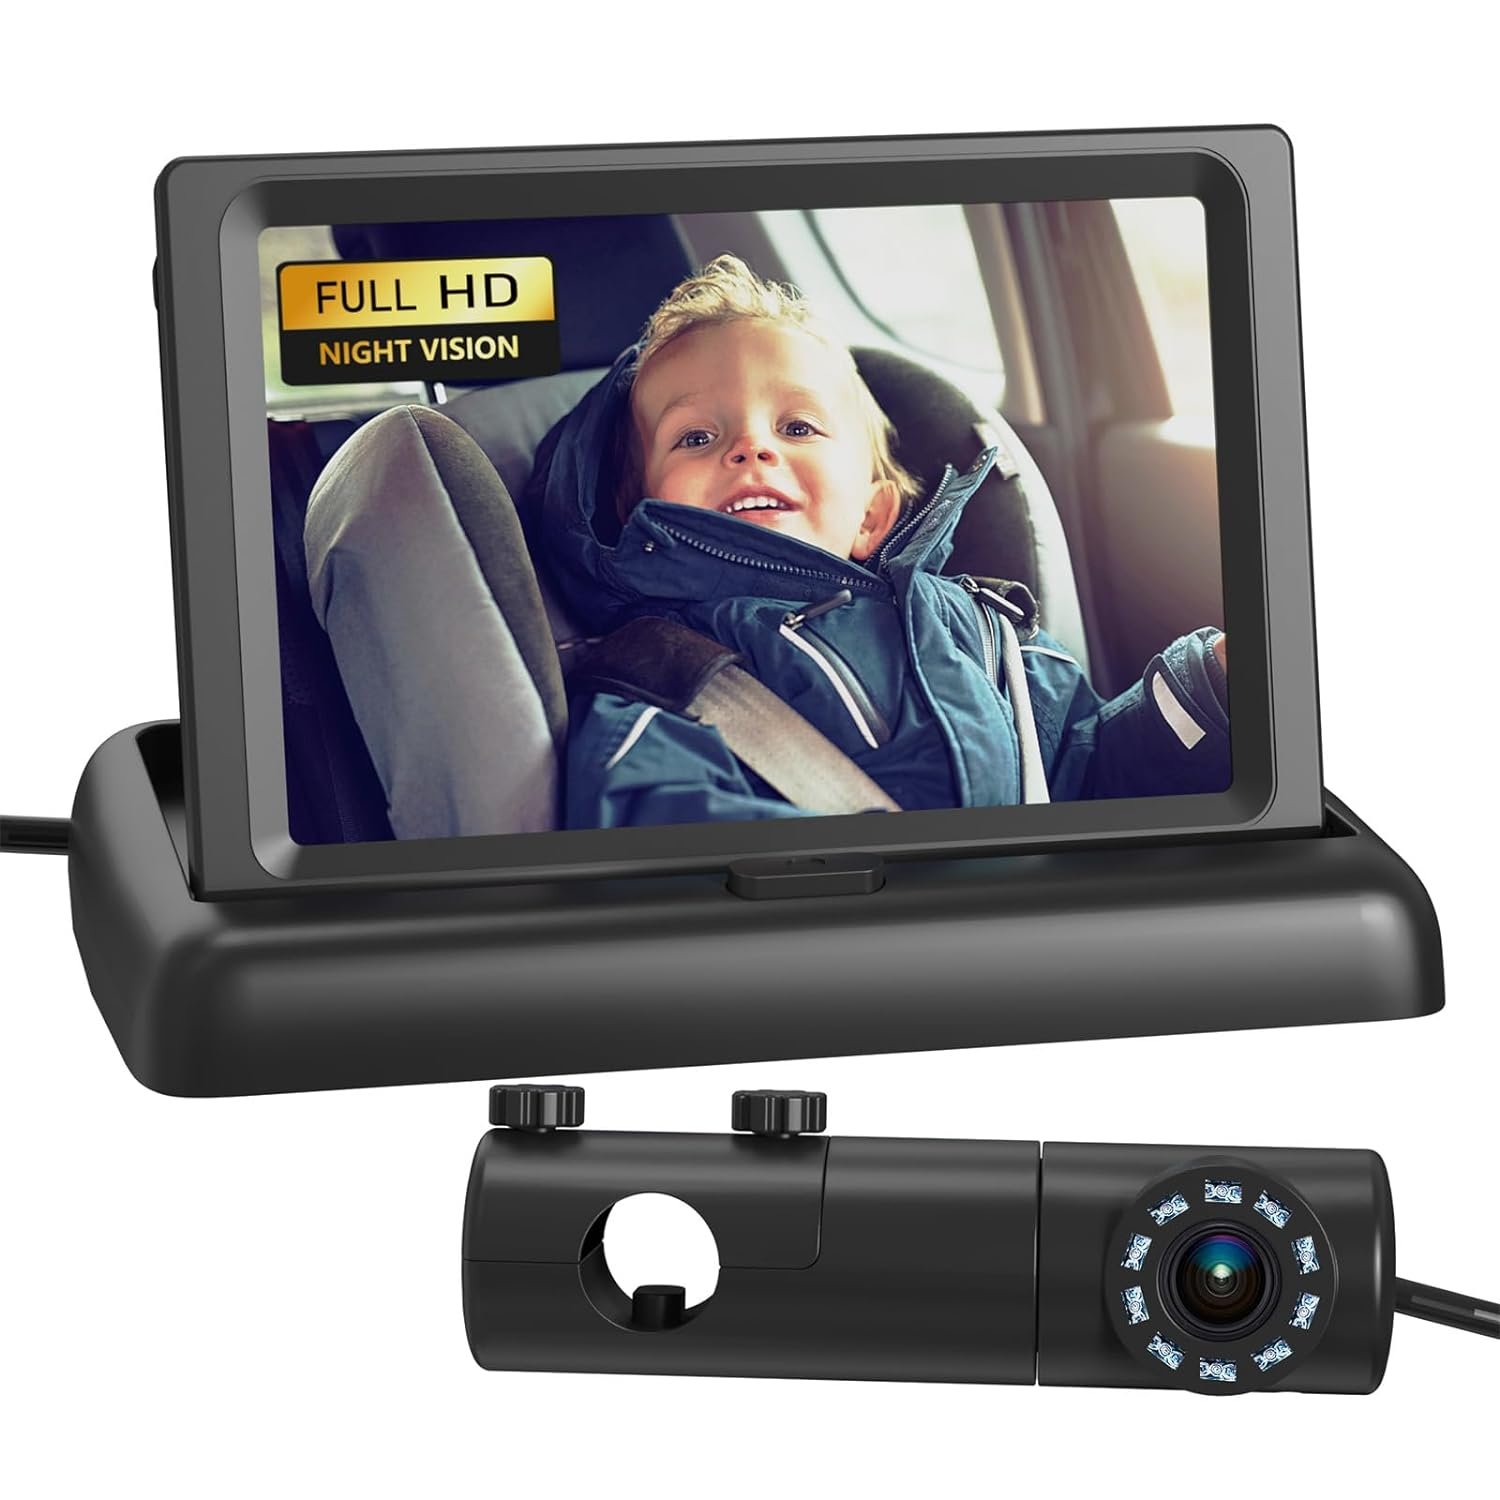 Grownsy Baby Car Camera, HD Display Baby Car Mirror with Night Vision Feature, 4.3 Inch Baby Car Monitor with Wide Clear View, Baby Car Seat Mirror Camera Rear Facing to Observe Babys Every Move